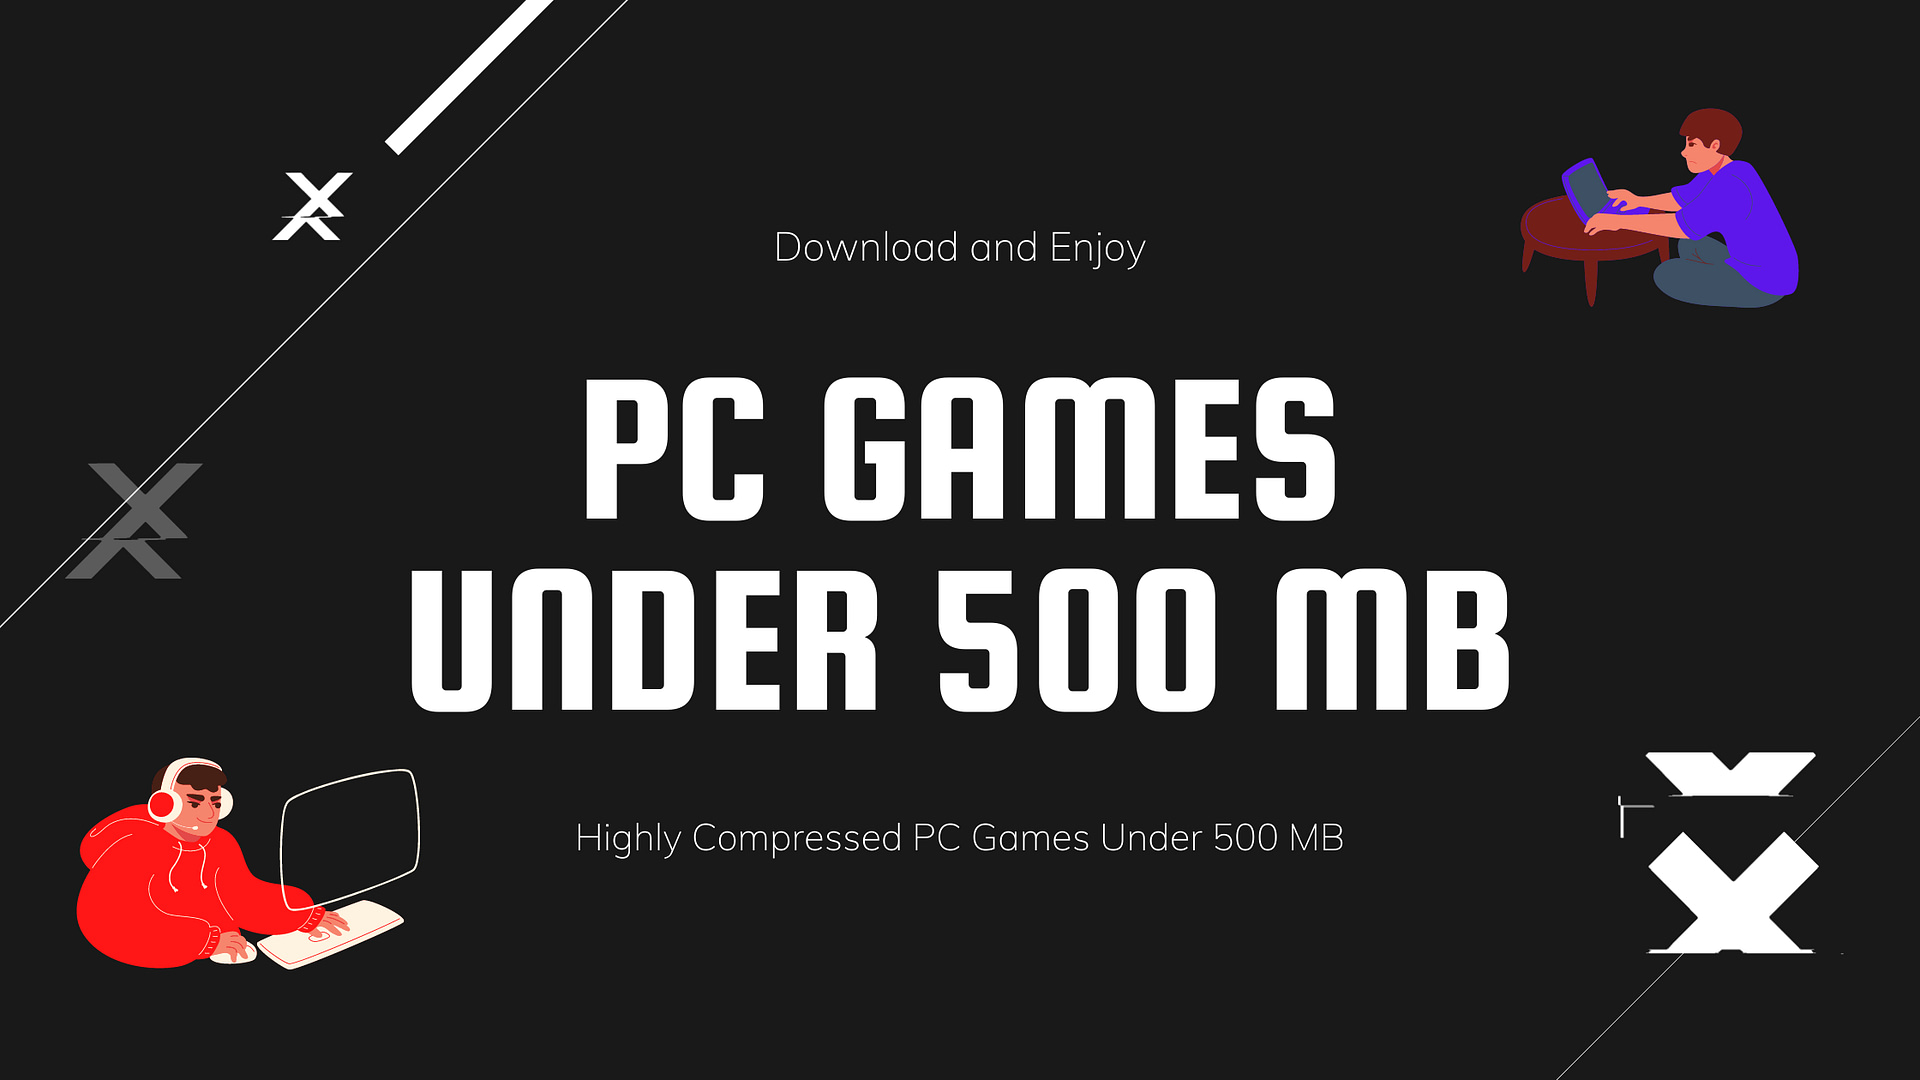 Highly Compressed PC Games Under 500 MB